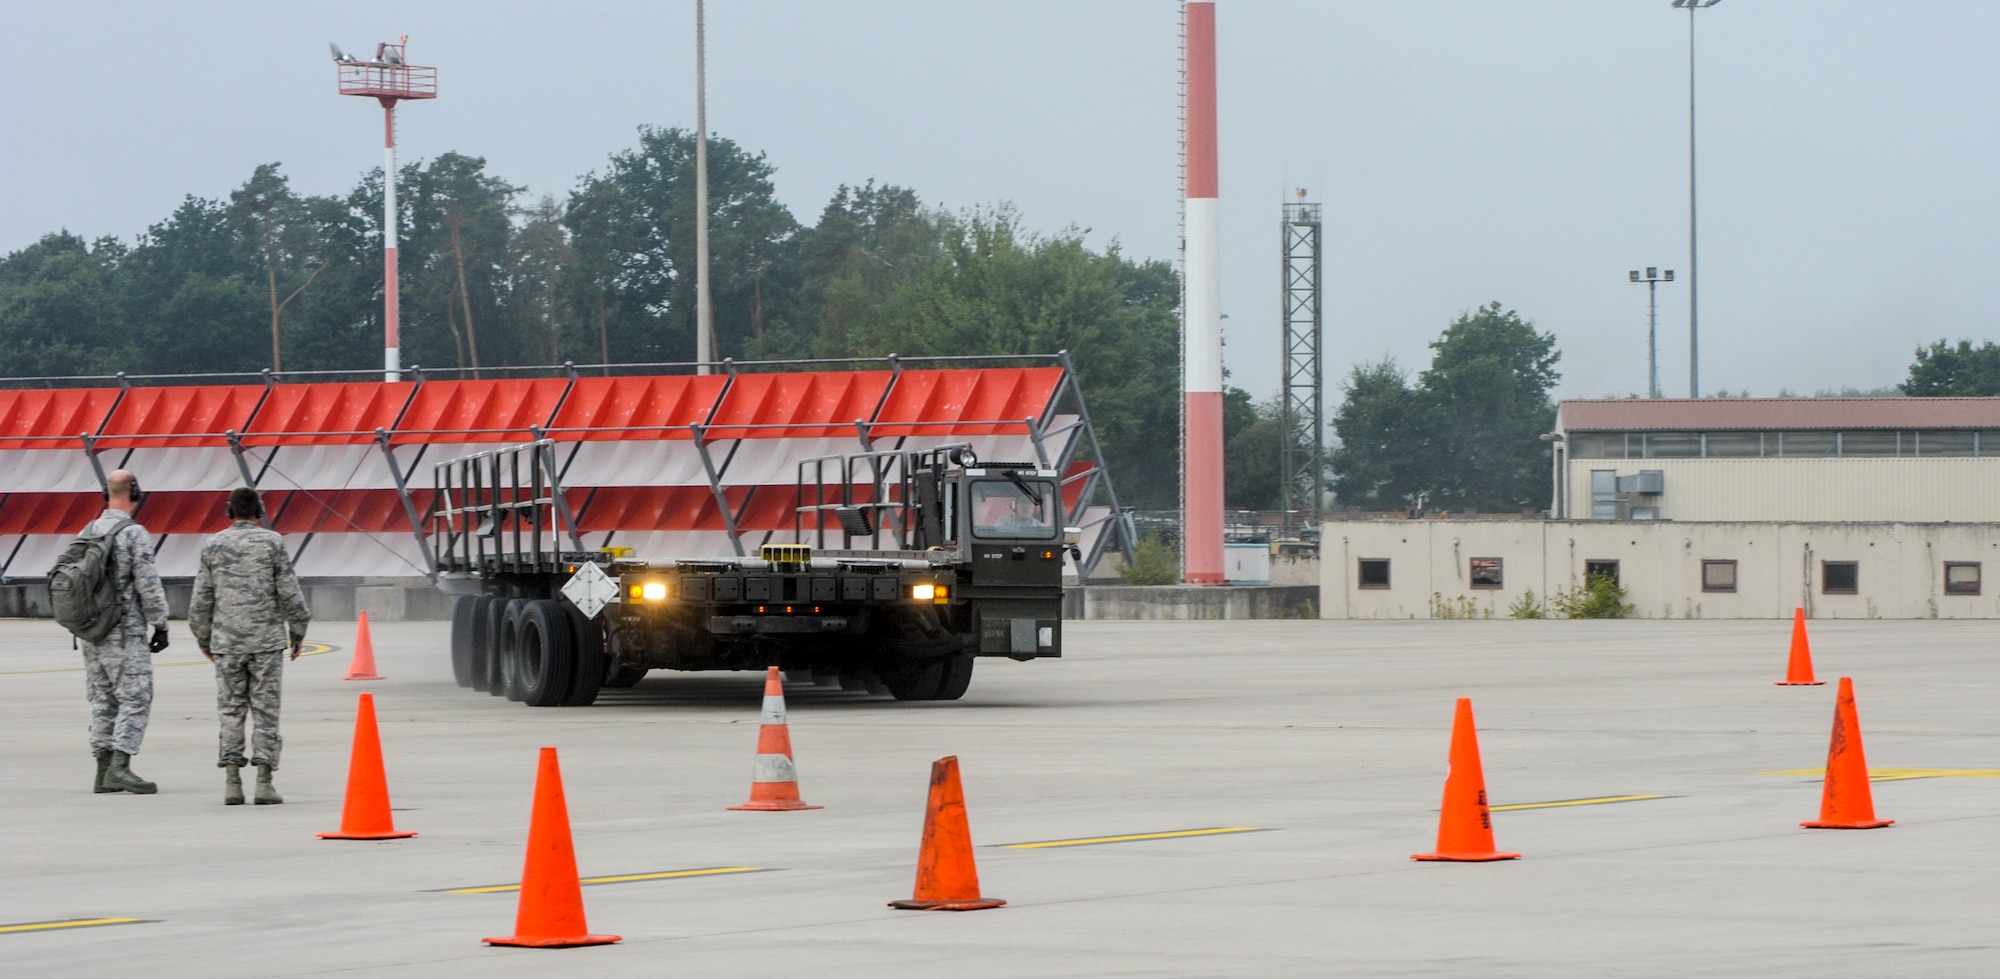 Airman Kyle George, an air transportation technician from the 728th Air Mobility Squadron, Incirlik Air Base, Turkey, navigates a 60K loader through an obstacle course with assistance from his teammates during the 2016 European Port Dawg Rodeo Sept. 17, 2016, at Ramstein Air Base, Germany. Forty Airmen representing five units competed in the competition, which was comprised of events that tested the knowledge and skills of air transportation technicians. (U.S. Air Force photo/Staff Sgt. Timothy Moore)